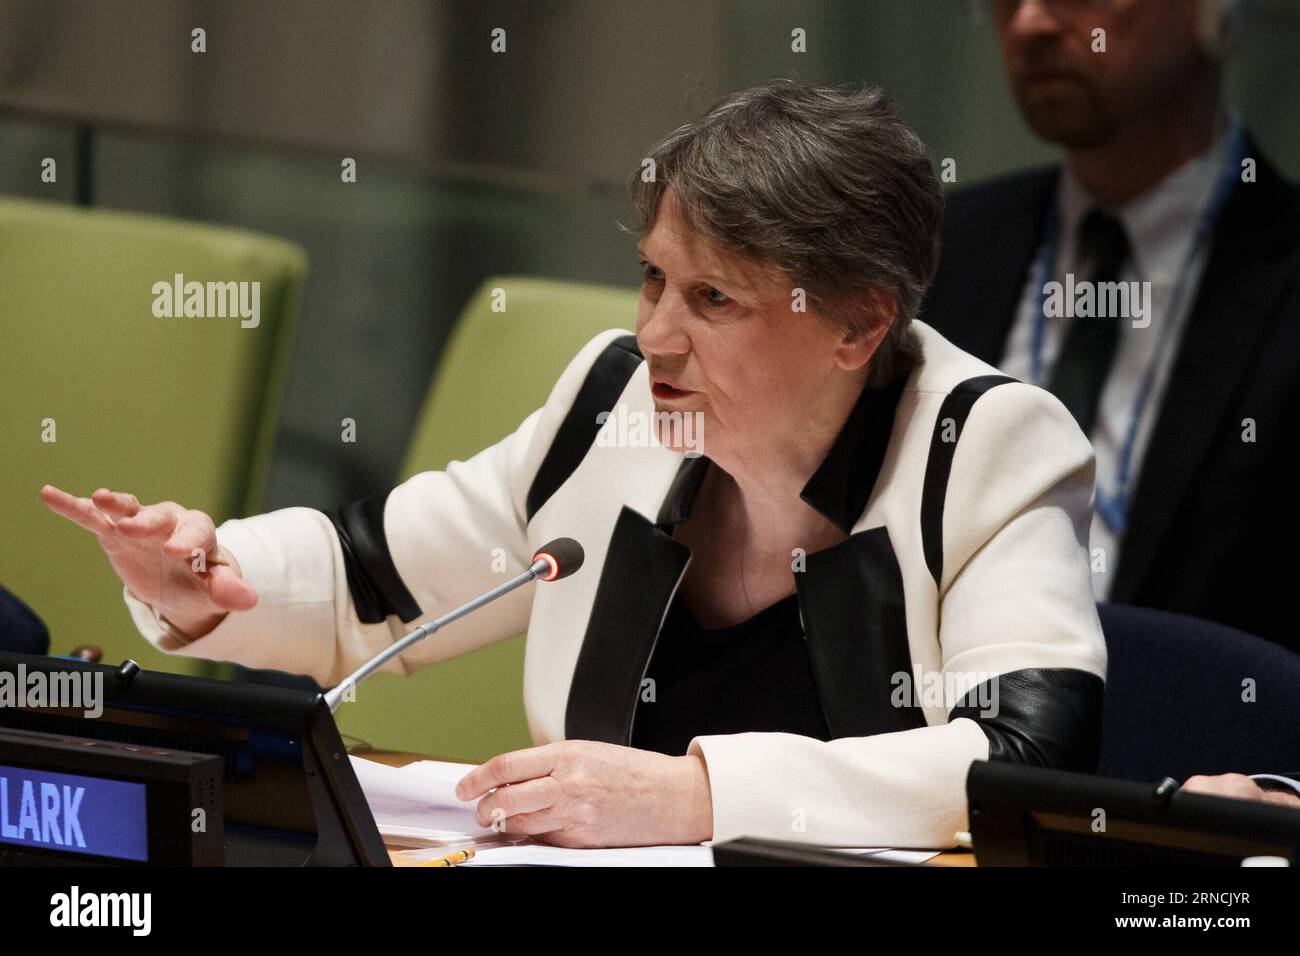 (160414) -- NEW YORK, April 14, 2016 -- Helen Clark, former Prime Minister of New Zealand and Administrator of the United Nations Development Programme (UNDP), candidate for the position of the next secretary-general, presents herself to the member states at the United Nations headquarters in New York, April 14, 2016. The UN General Assembly on Tuesday kicked off a three-day informal dialogue with candidates for the position of the next secretary-general. ) UN-NEW YORK-GENERAL ASSEMBLY-SECRETARY-GENERAL-CANDIDATE-HELEN CLARK LixMuzi PUBLICATIONxNOTxINxCHN   160414 New York April 14 2016 Helen Stock Photo